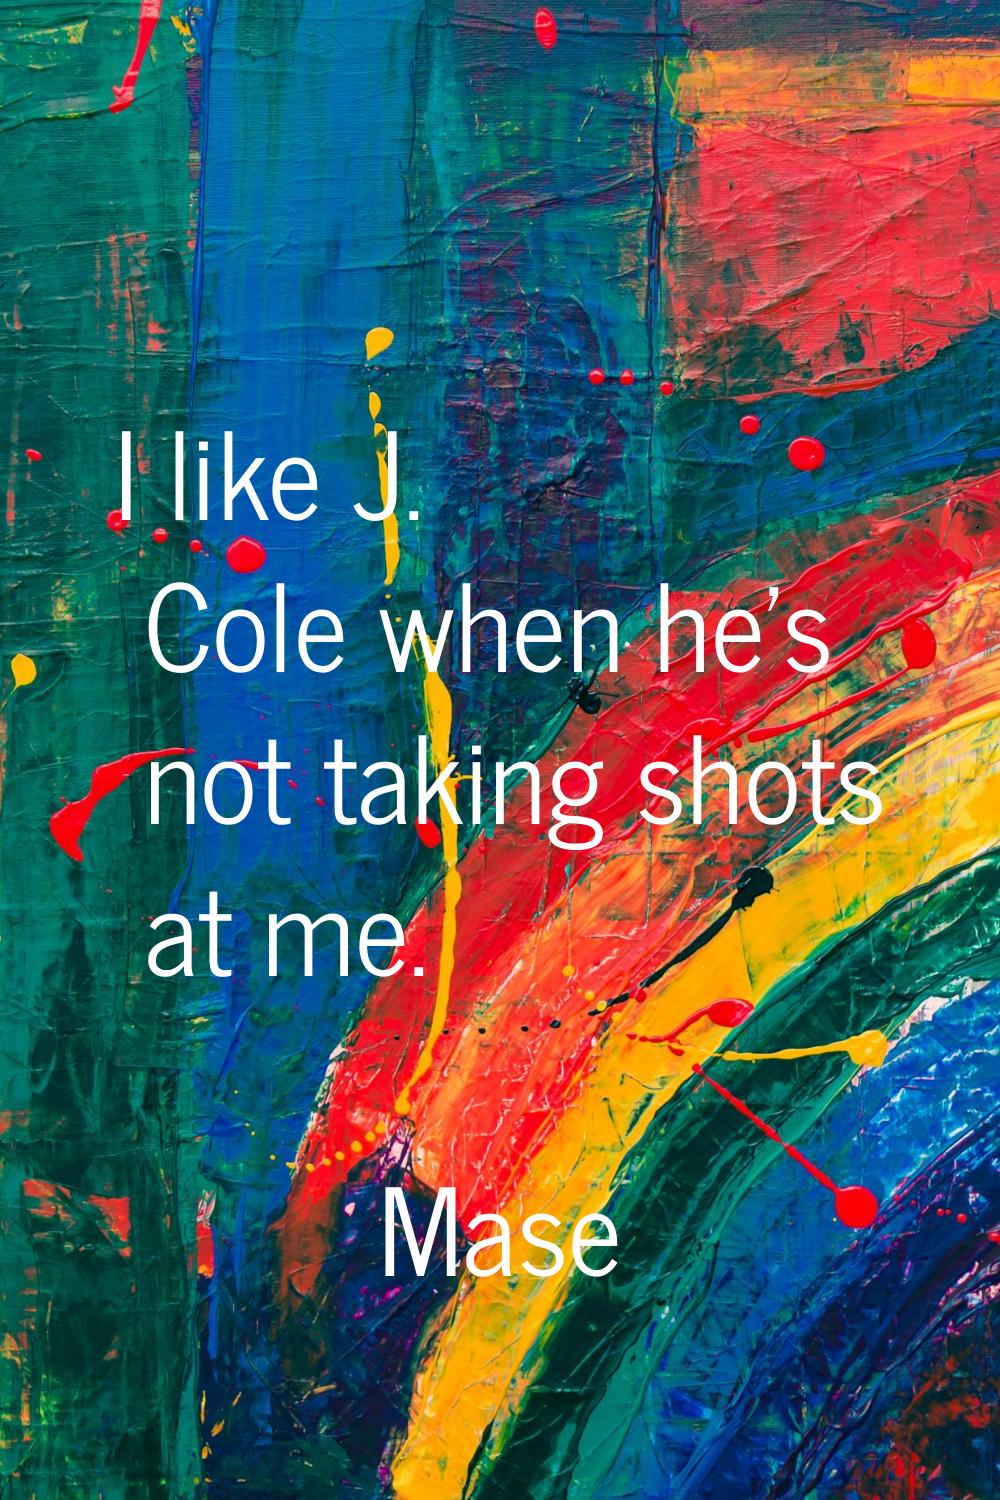 I like J. Cole when he's not taking shots at me.